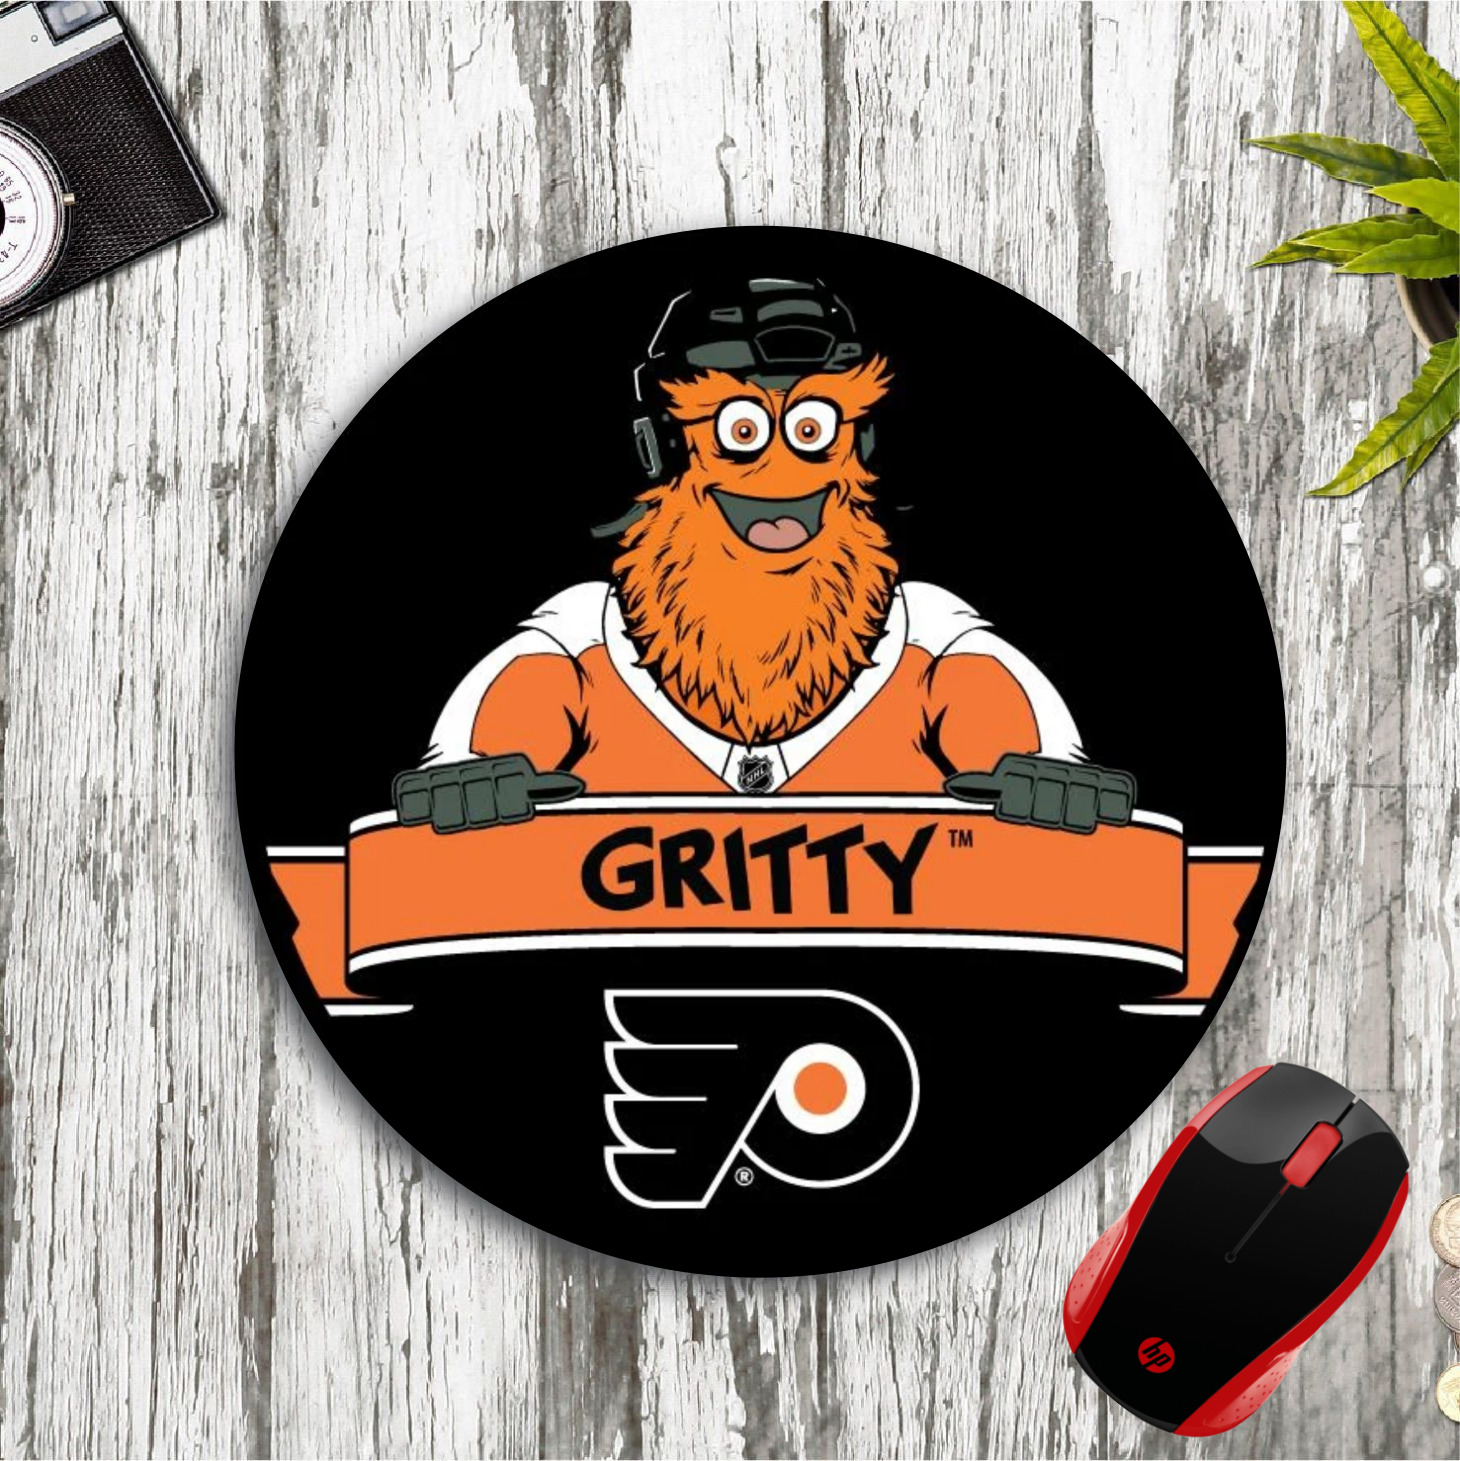 PHILADELPHIA FLYERS GRITTY ROUND NEOPRENE MOUSE PAD MAT HOME SCHOOL OFFICE GIFT